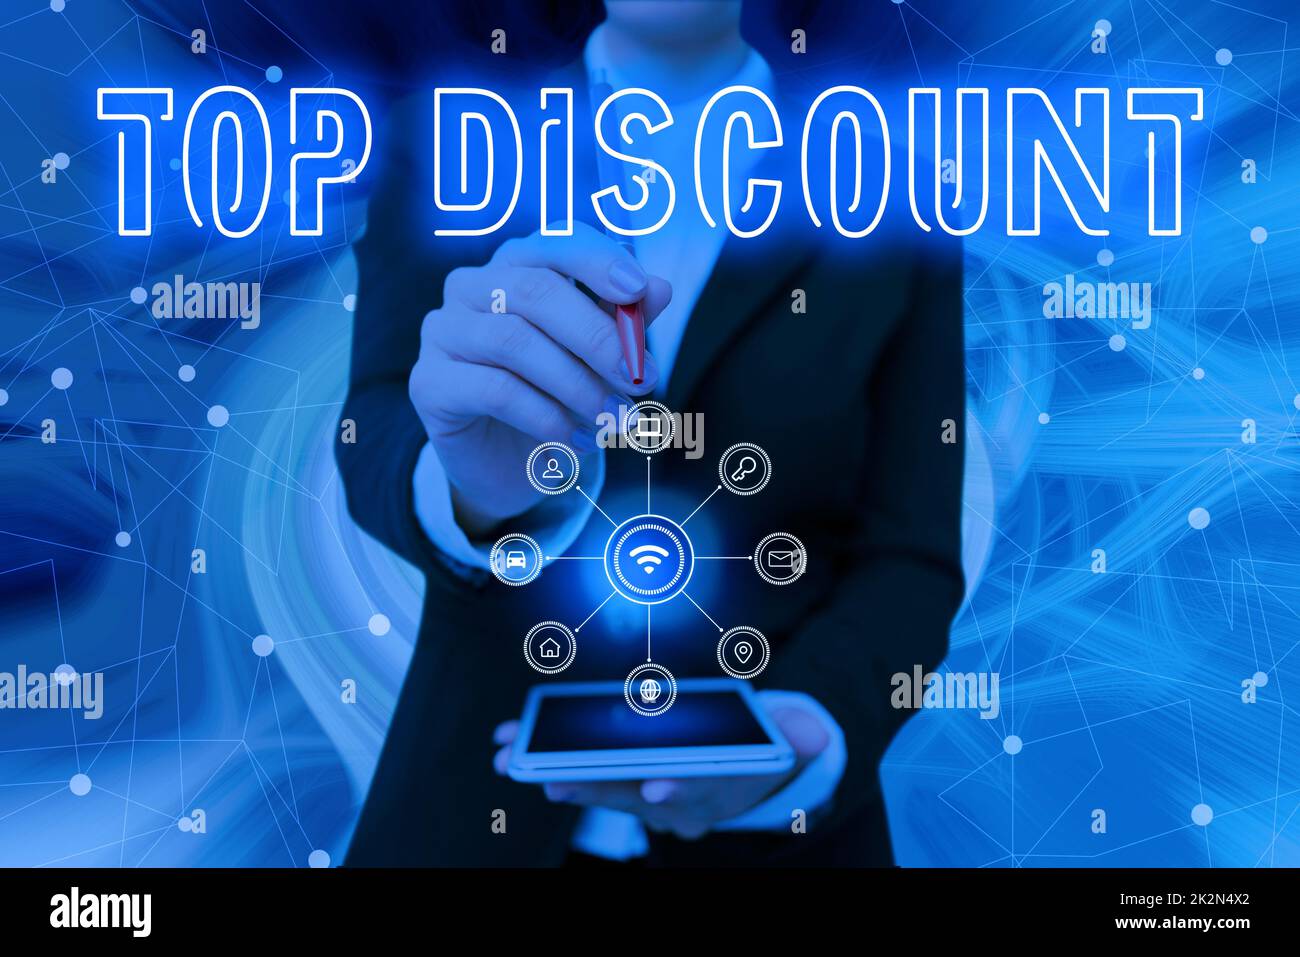 Conceptual display Top Discount. Business showcase Best Price Guaranteed Hot Items Crazy Sale Promotions Lady Pressing Screen Of Mobile Phone Showing The Futuristic Technology Stock Photo